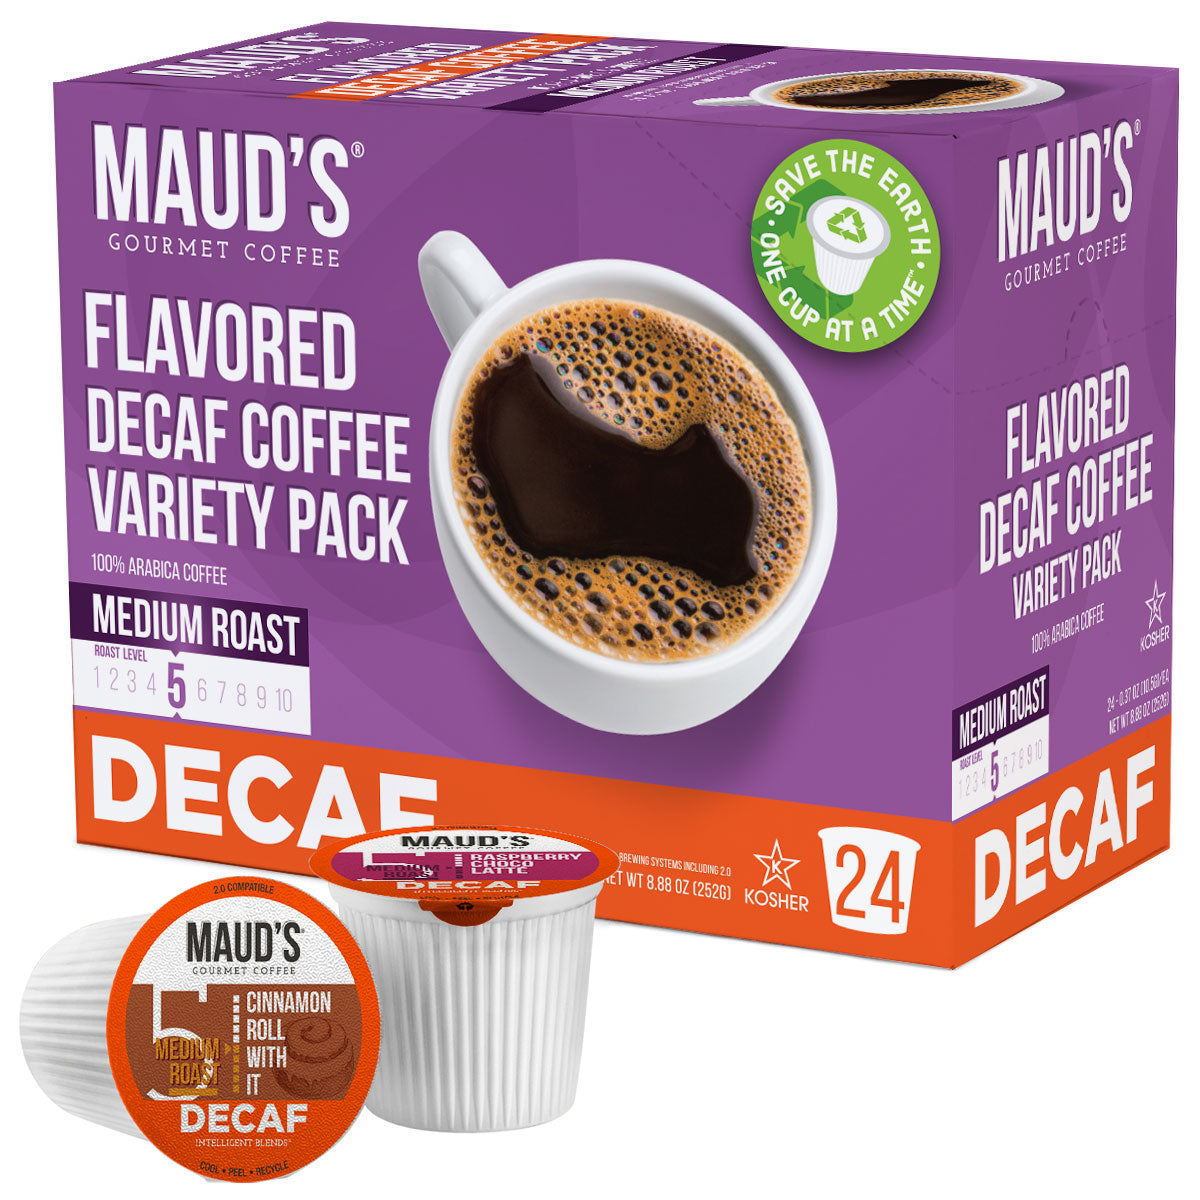 Maud's Decaf Flavored Coffee Pods Variety Pack (6 Flavors) - 24 Pods